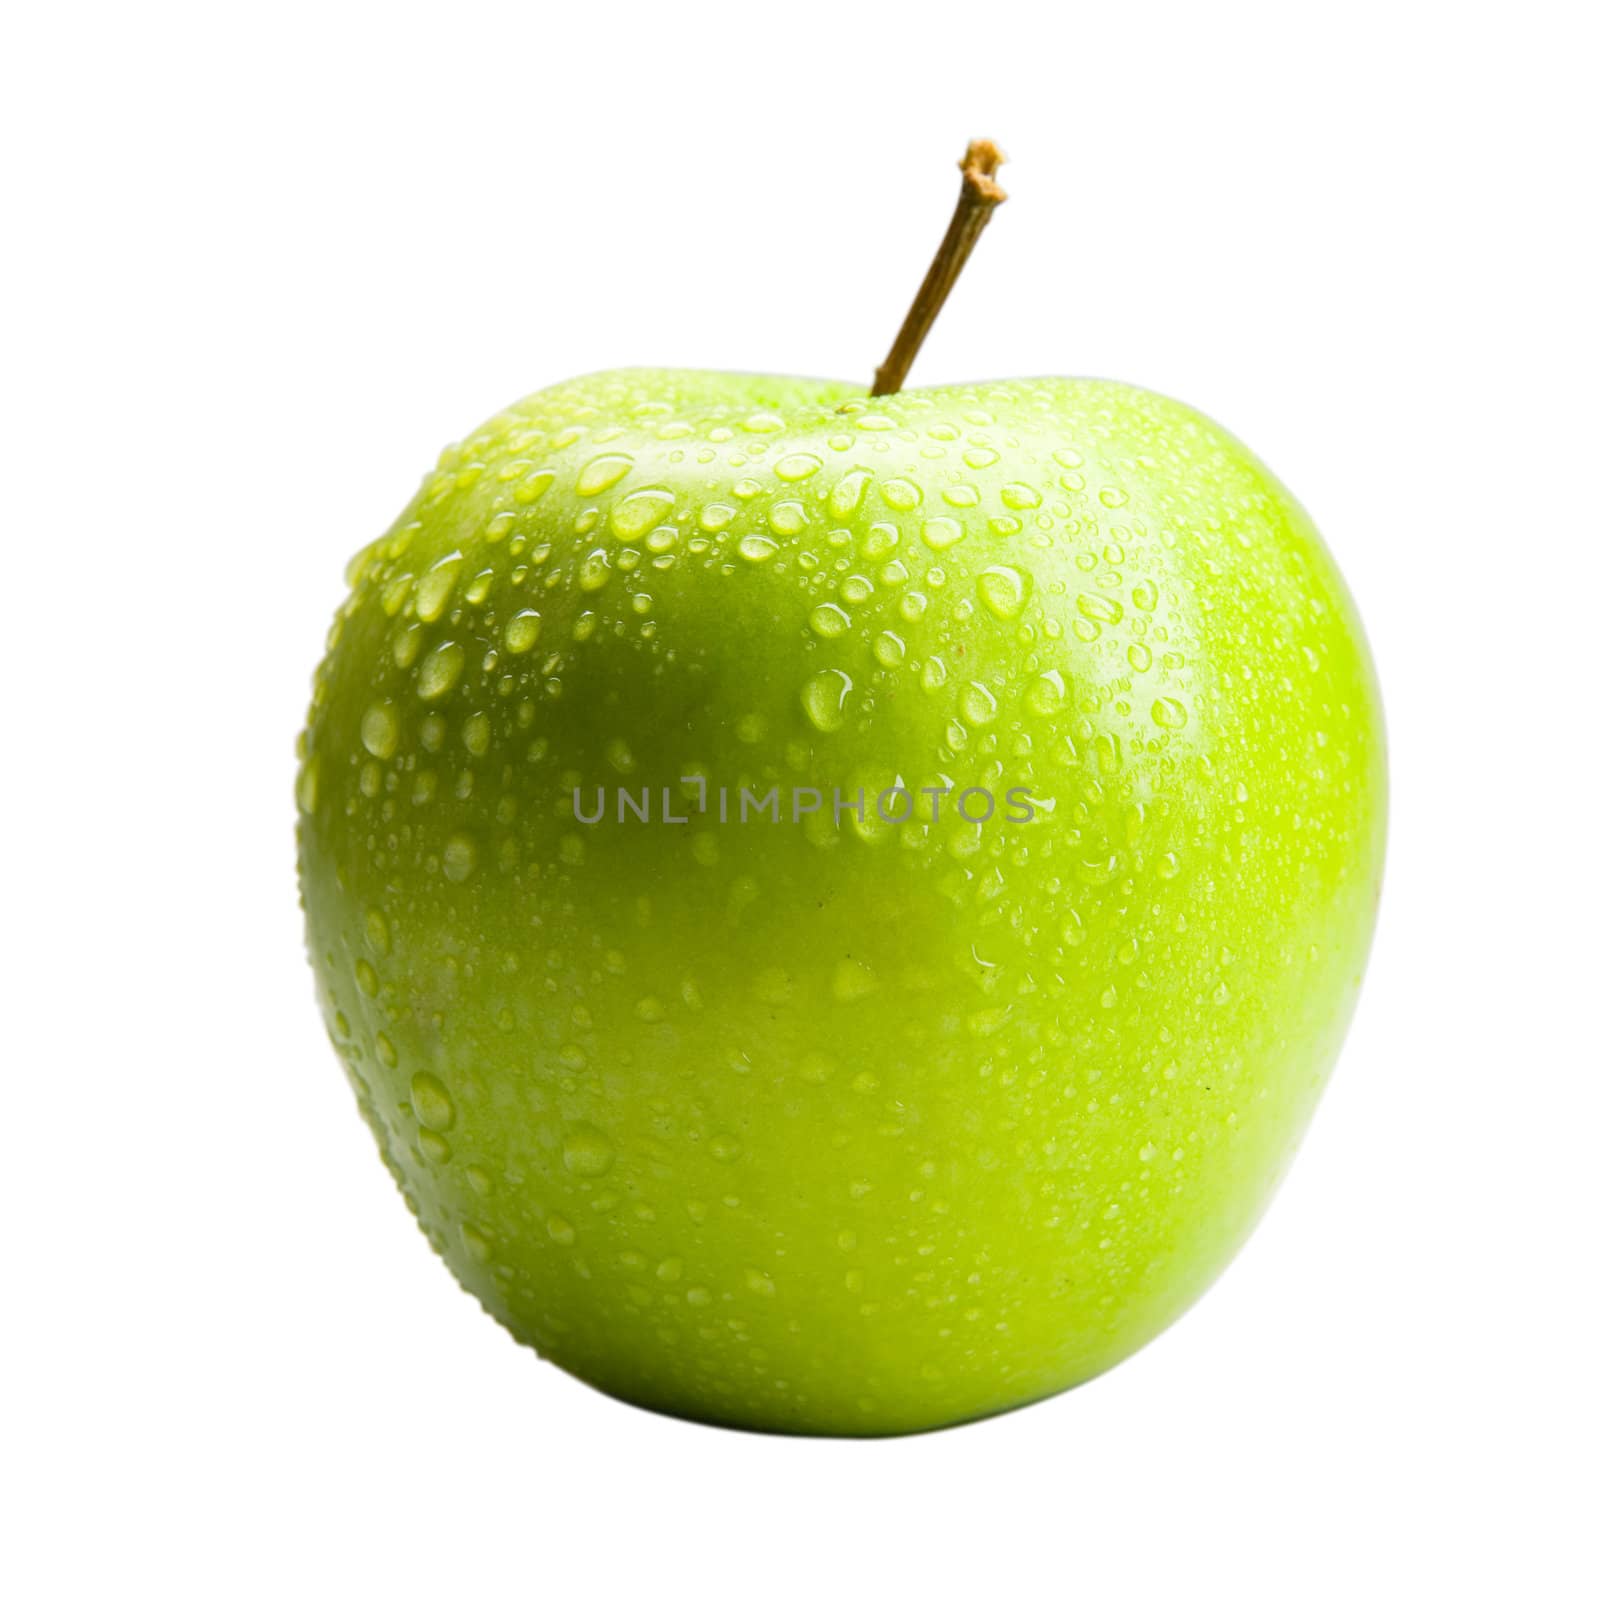 Wet green apple isolated on a white background